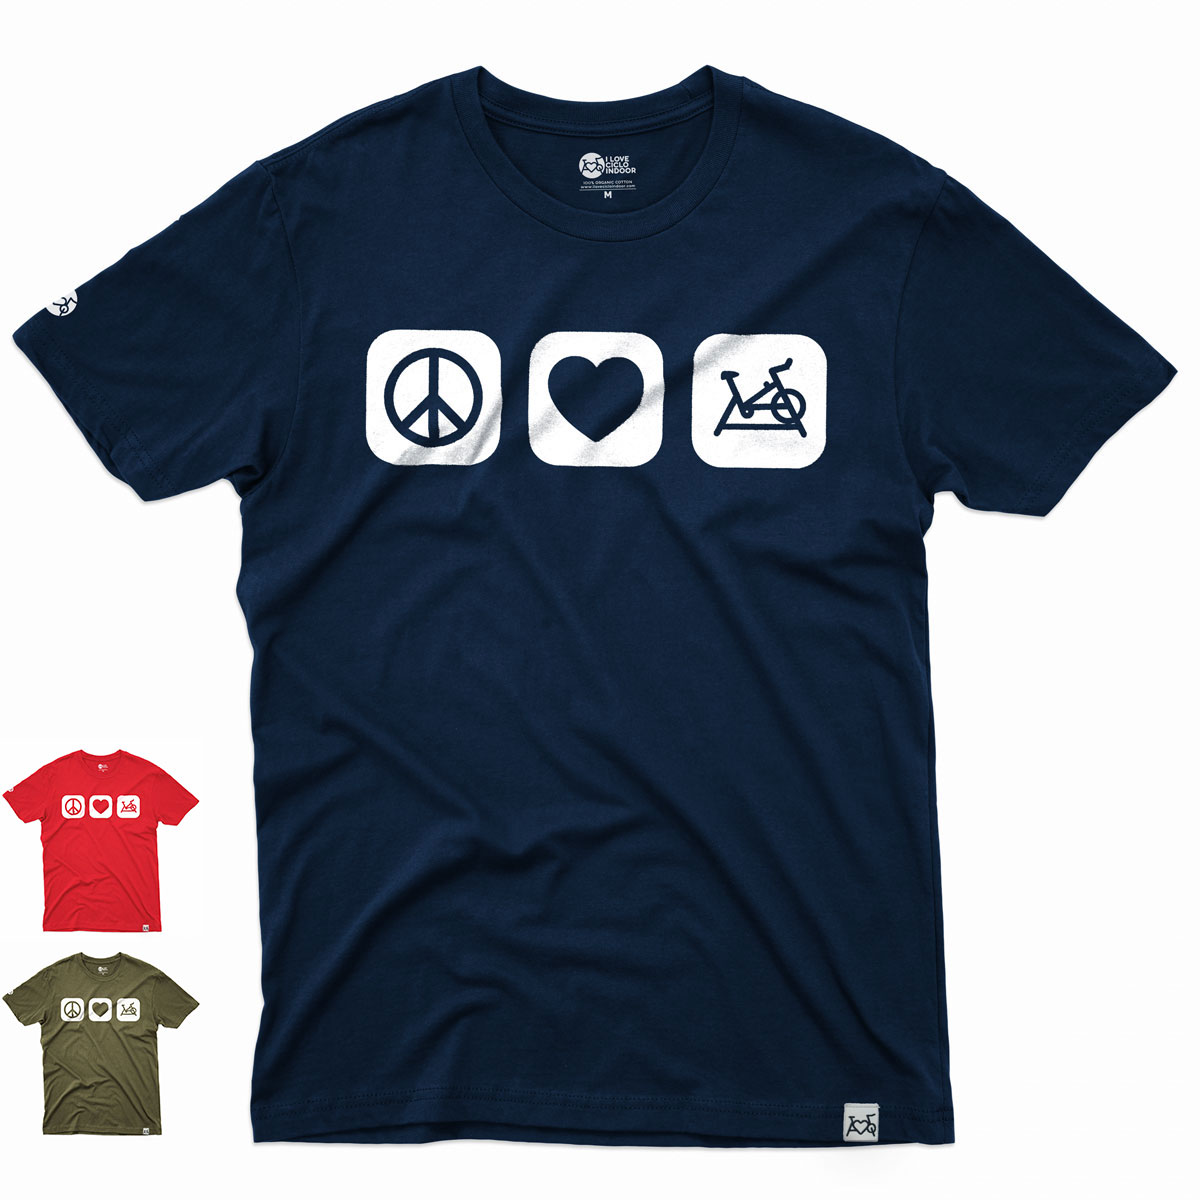 Camiseta PEACE&LOVE by Ciclolover